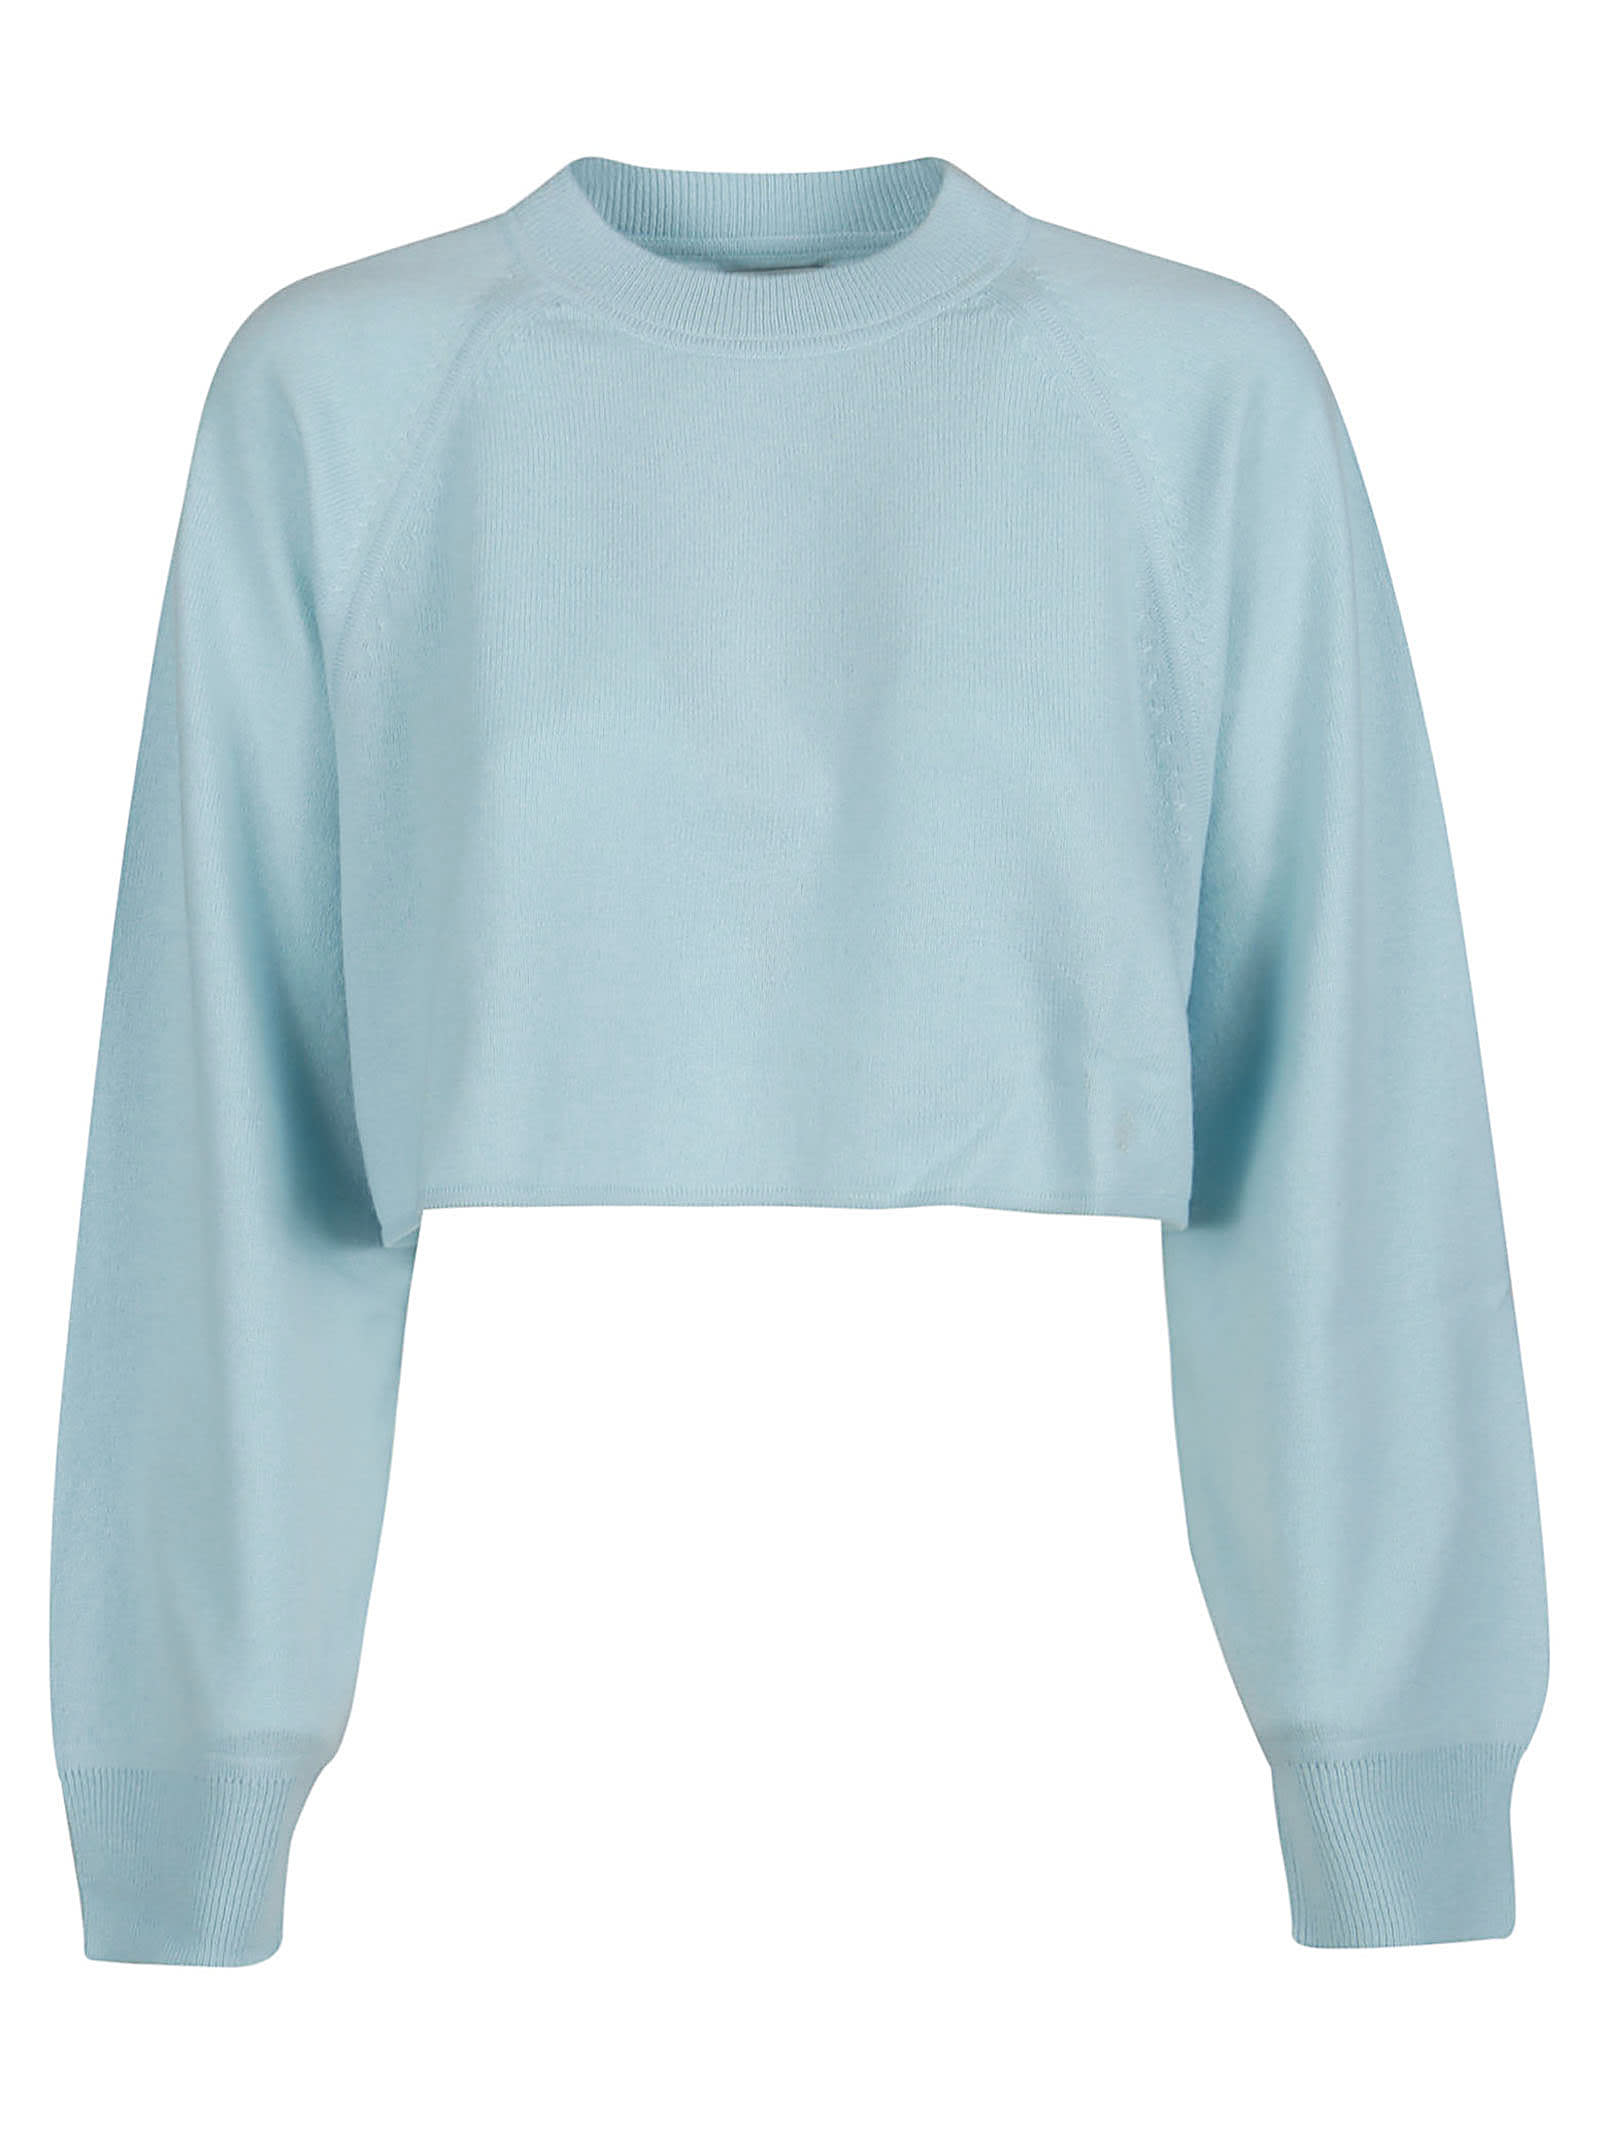 Loulou Studio Bocas Cropped Sweater